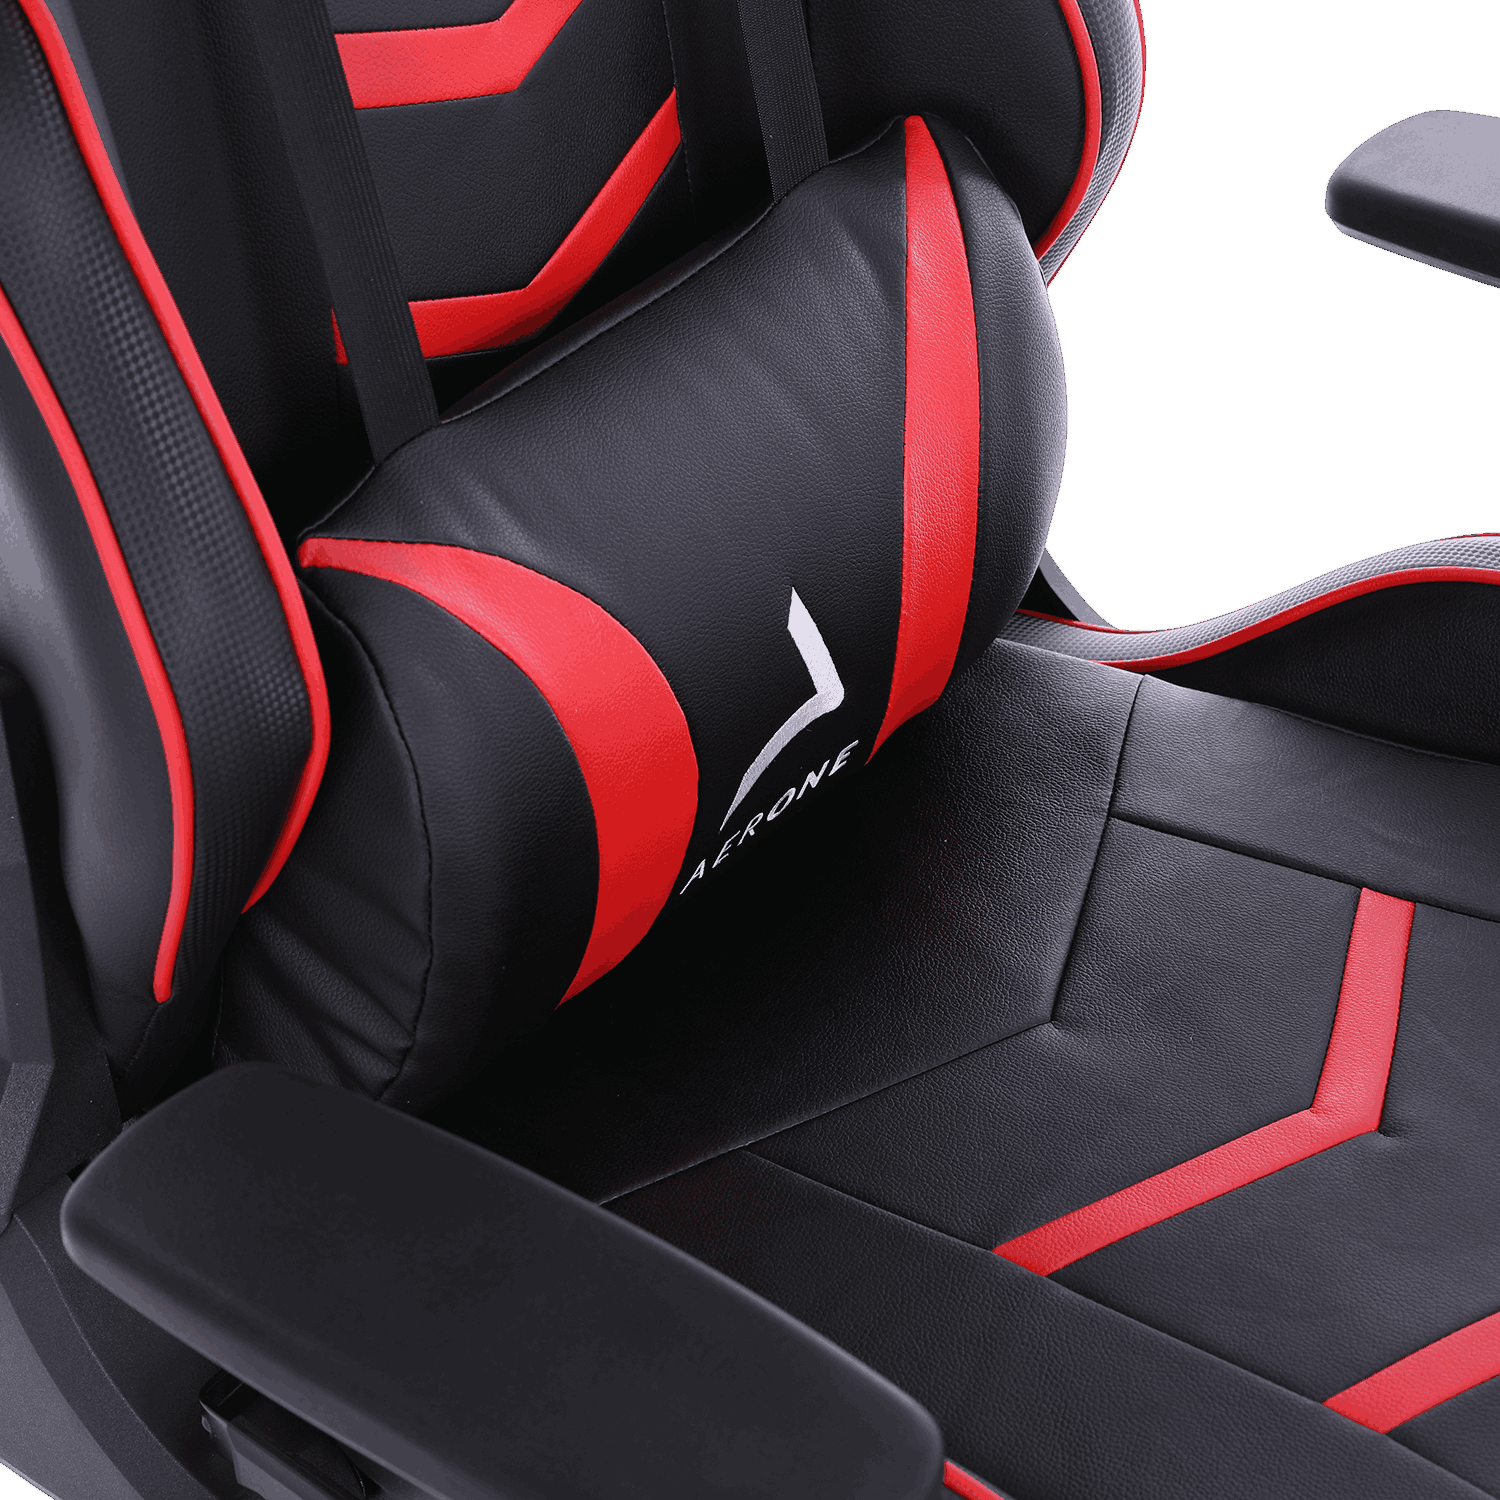 Silver Series Scarlet Red Gaming Chair